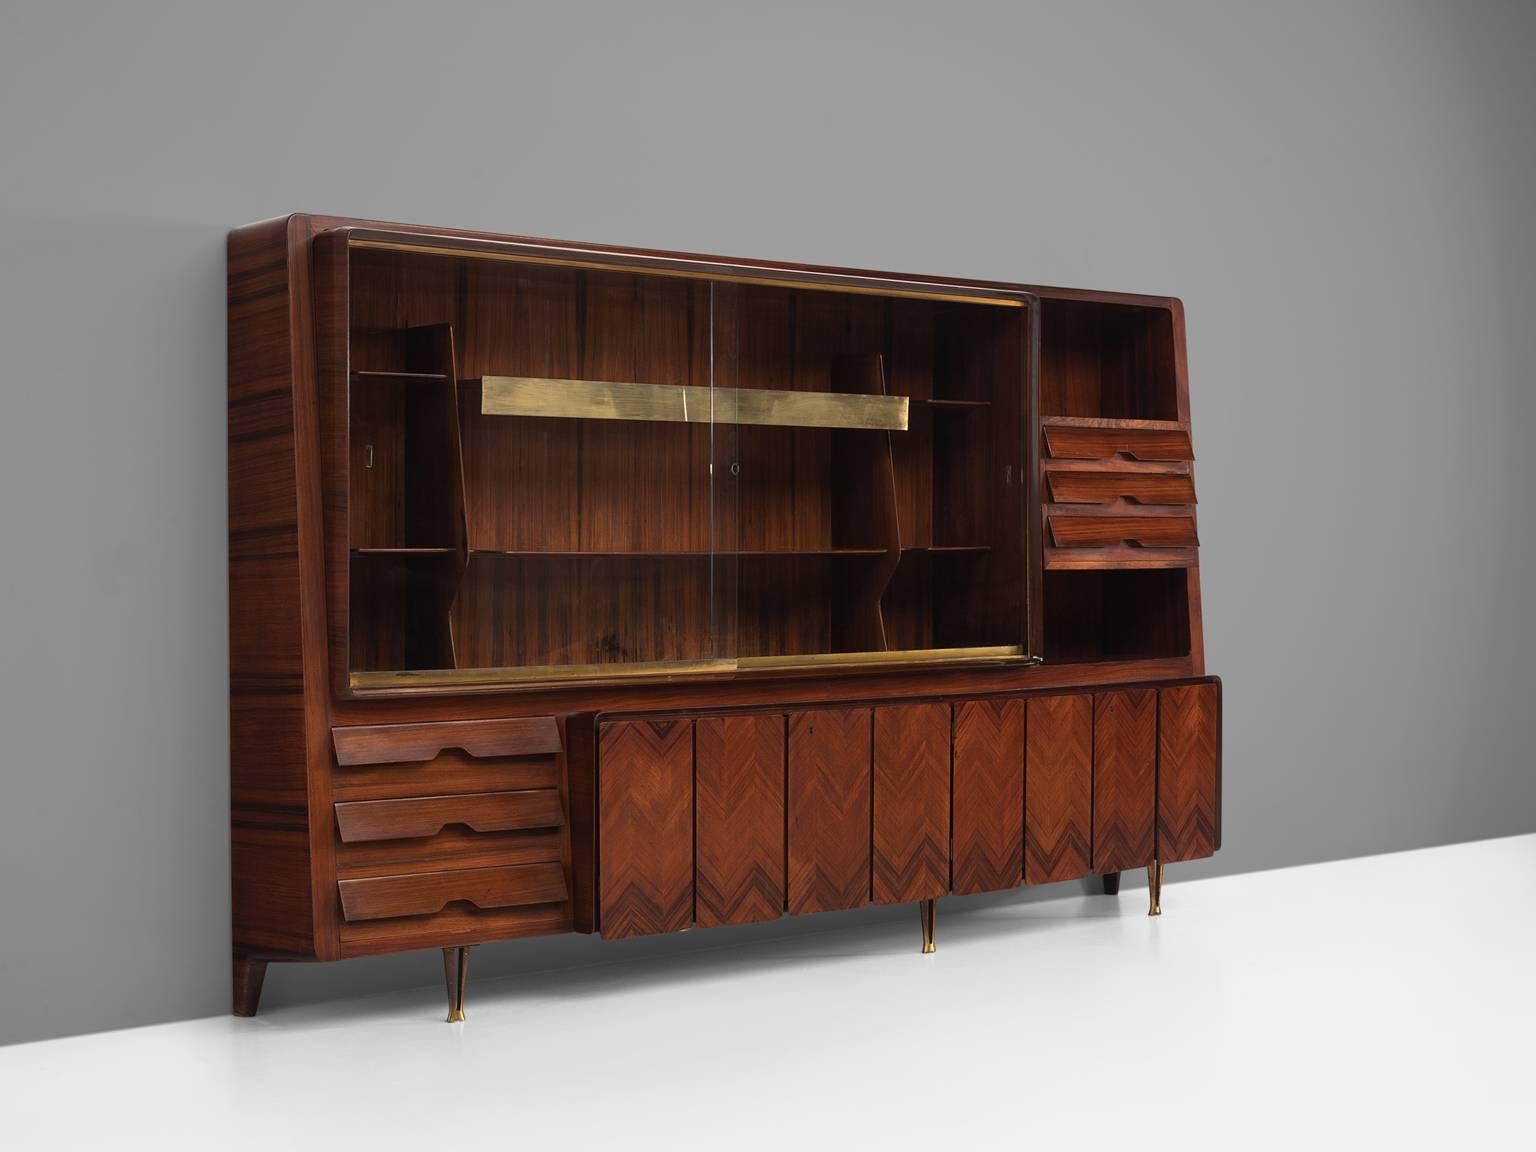 Dassi cabinet, in wood and brass, Italy 1950s.

This Italian chest is highly elegant and refined. The brass panels, handles, and patterned doors are all exquisitely produced. There are closed compartments such as drawers and doors and there are two